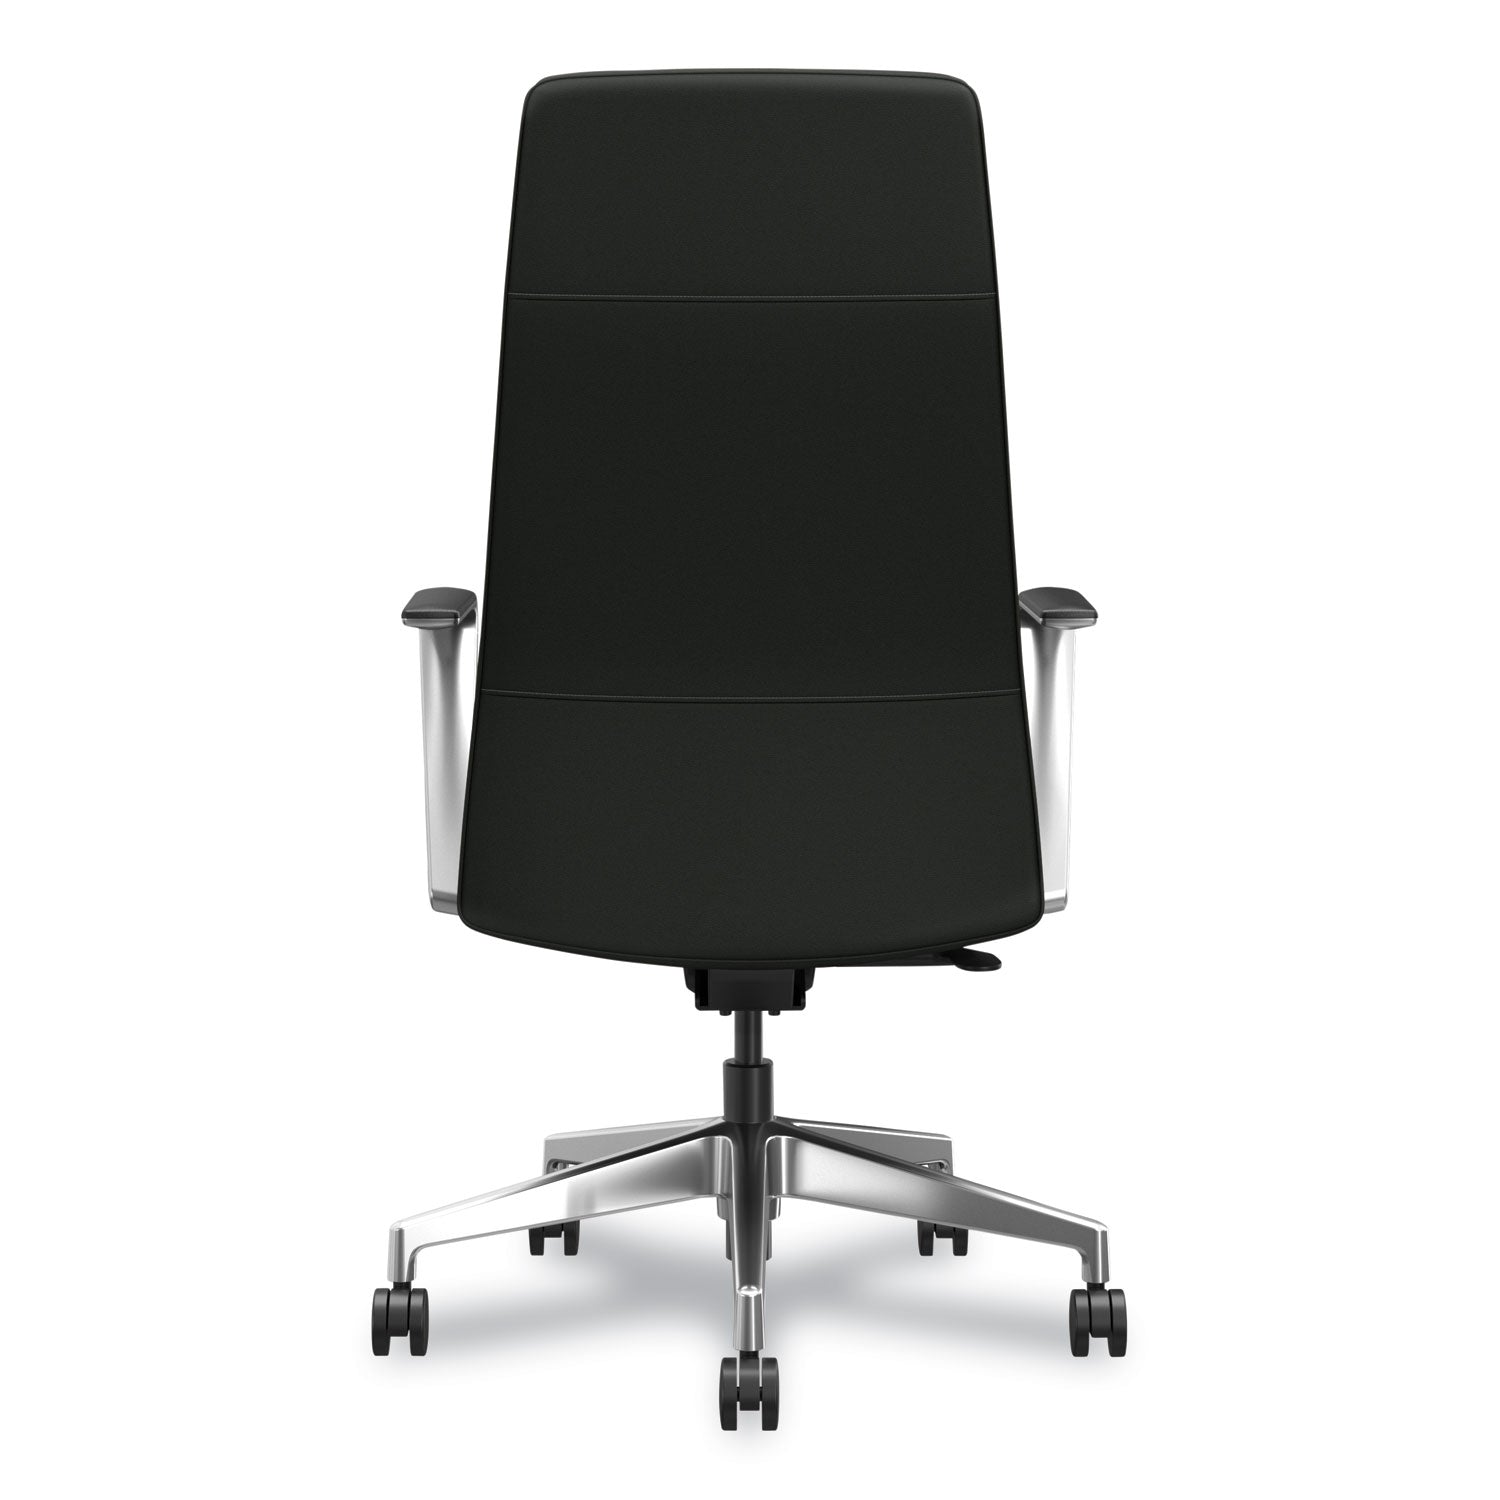 cofi-executive-high-back-chair-supports-up-to-300-lb-155-to-205-seat-height-black-seat-back-polished-aluminum-base_honceuw0pu10c9p - 2